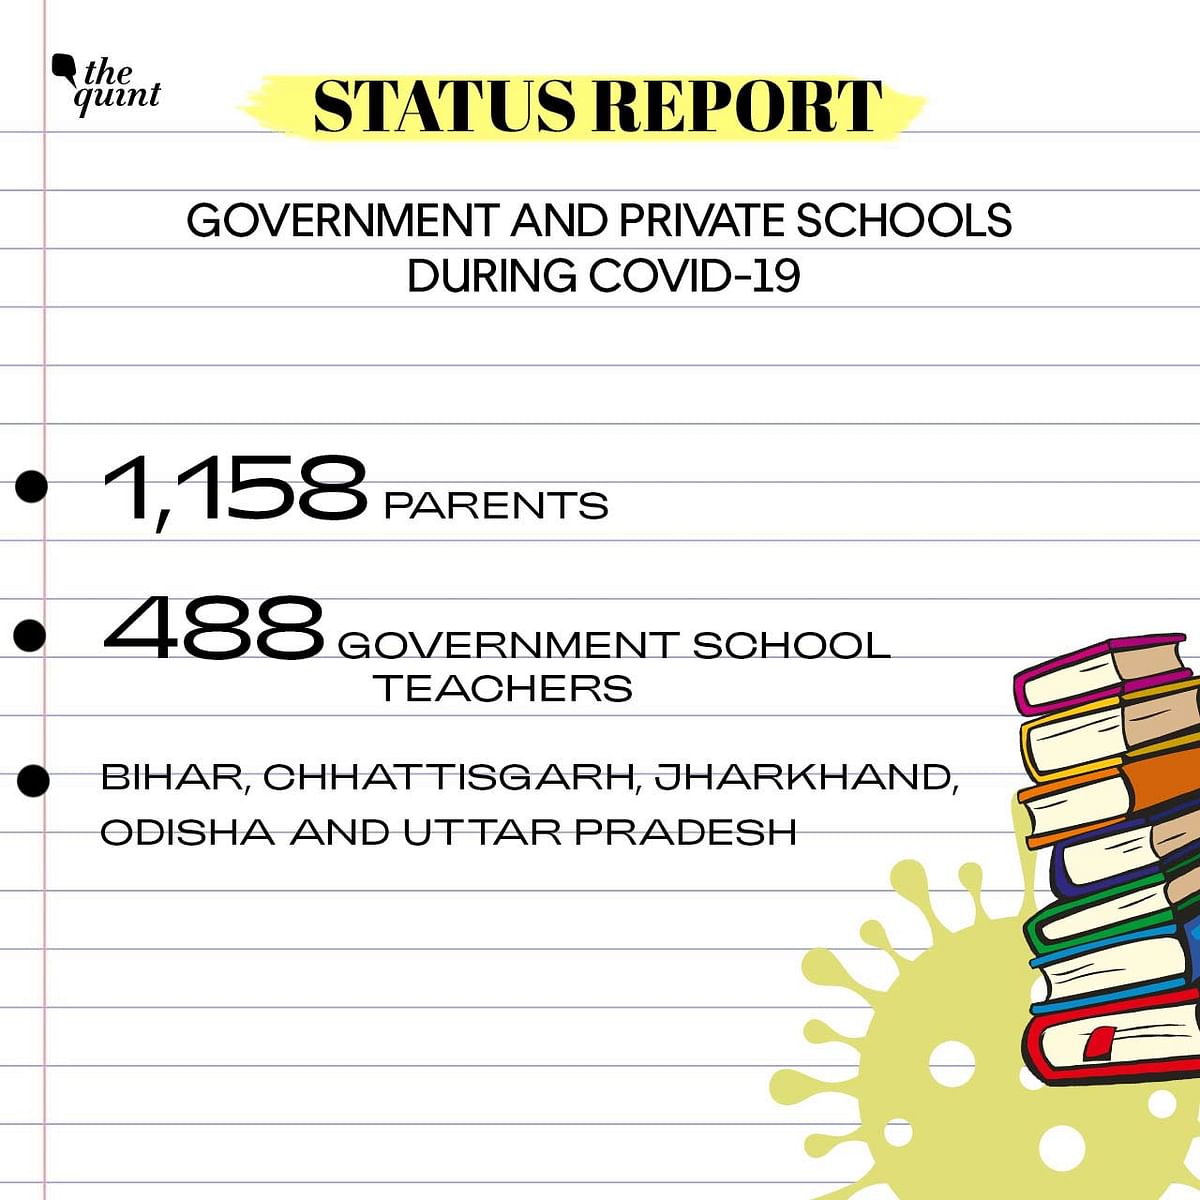 According to Oxfam India, over 80 percent government school teachers received no training for teaching online. 